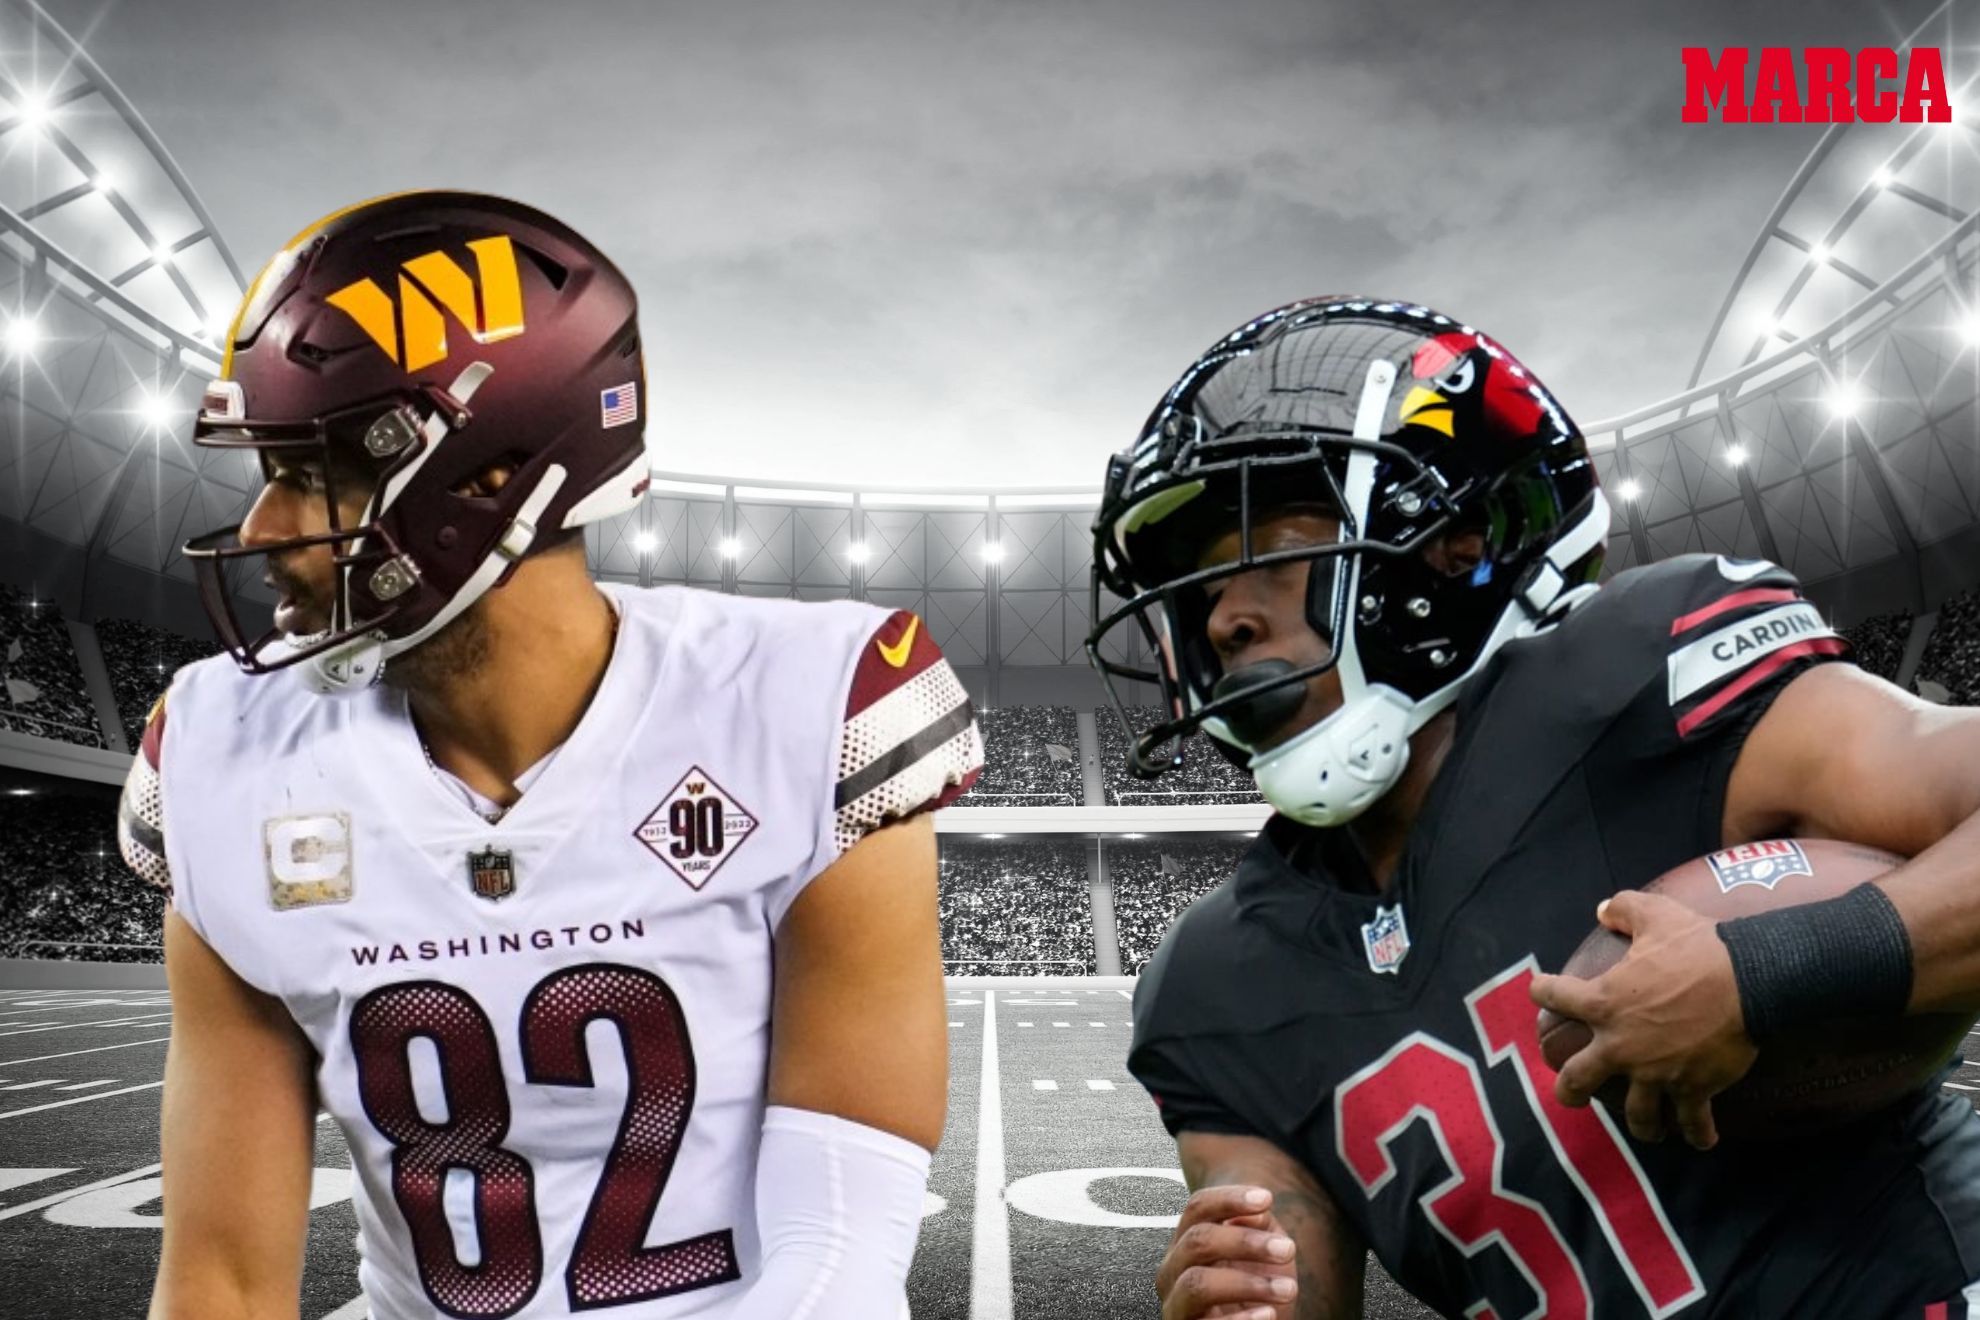 Logan Thomas (TE - Washington) and Emeri Demercado (RB - Cardinals) are two must-adds in Week 6 waivers.